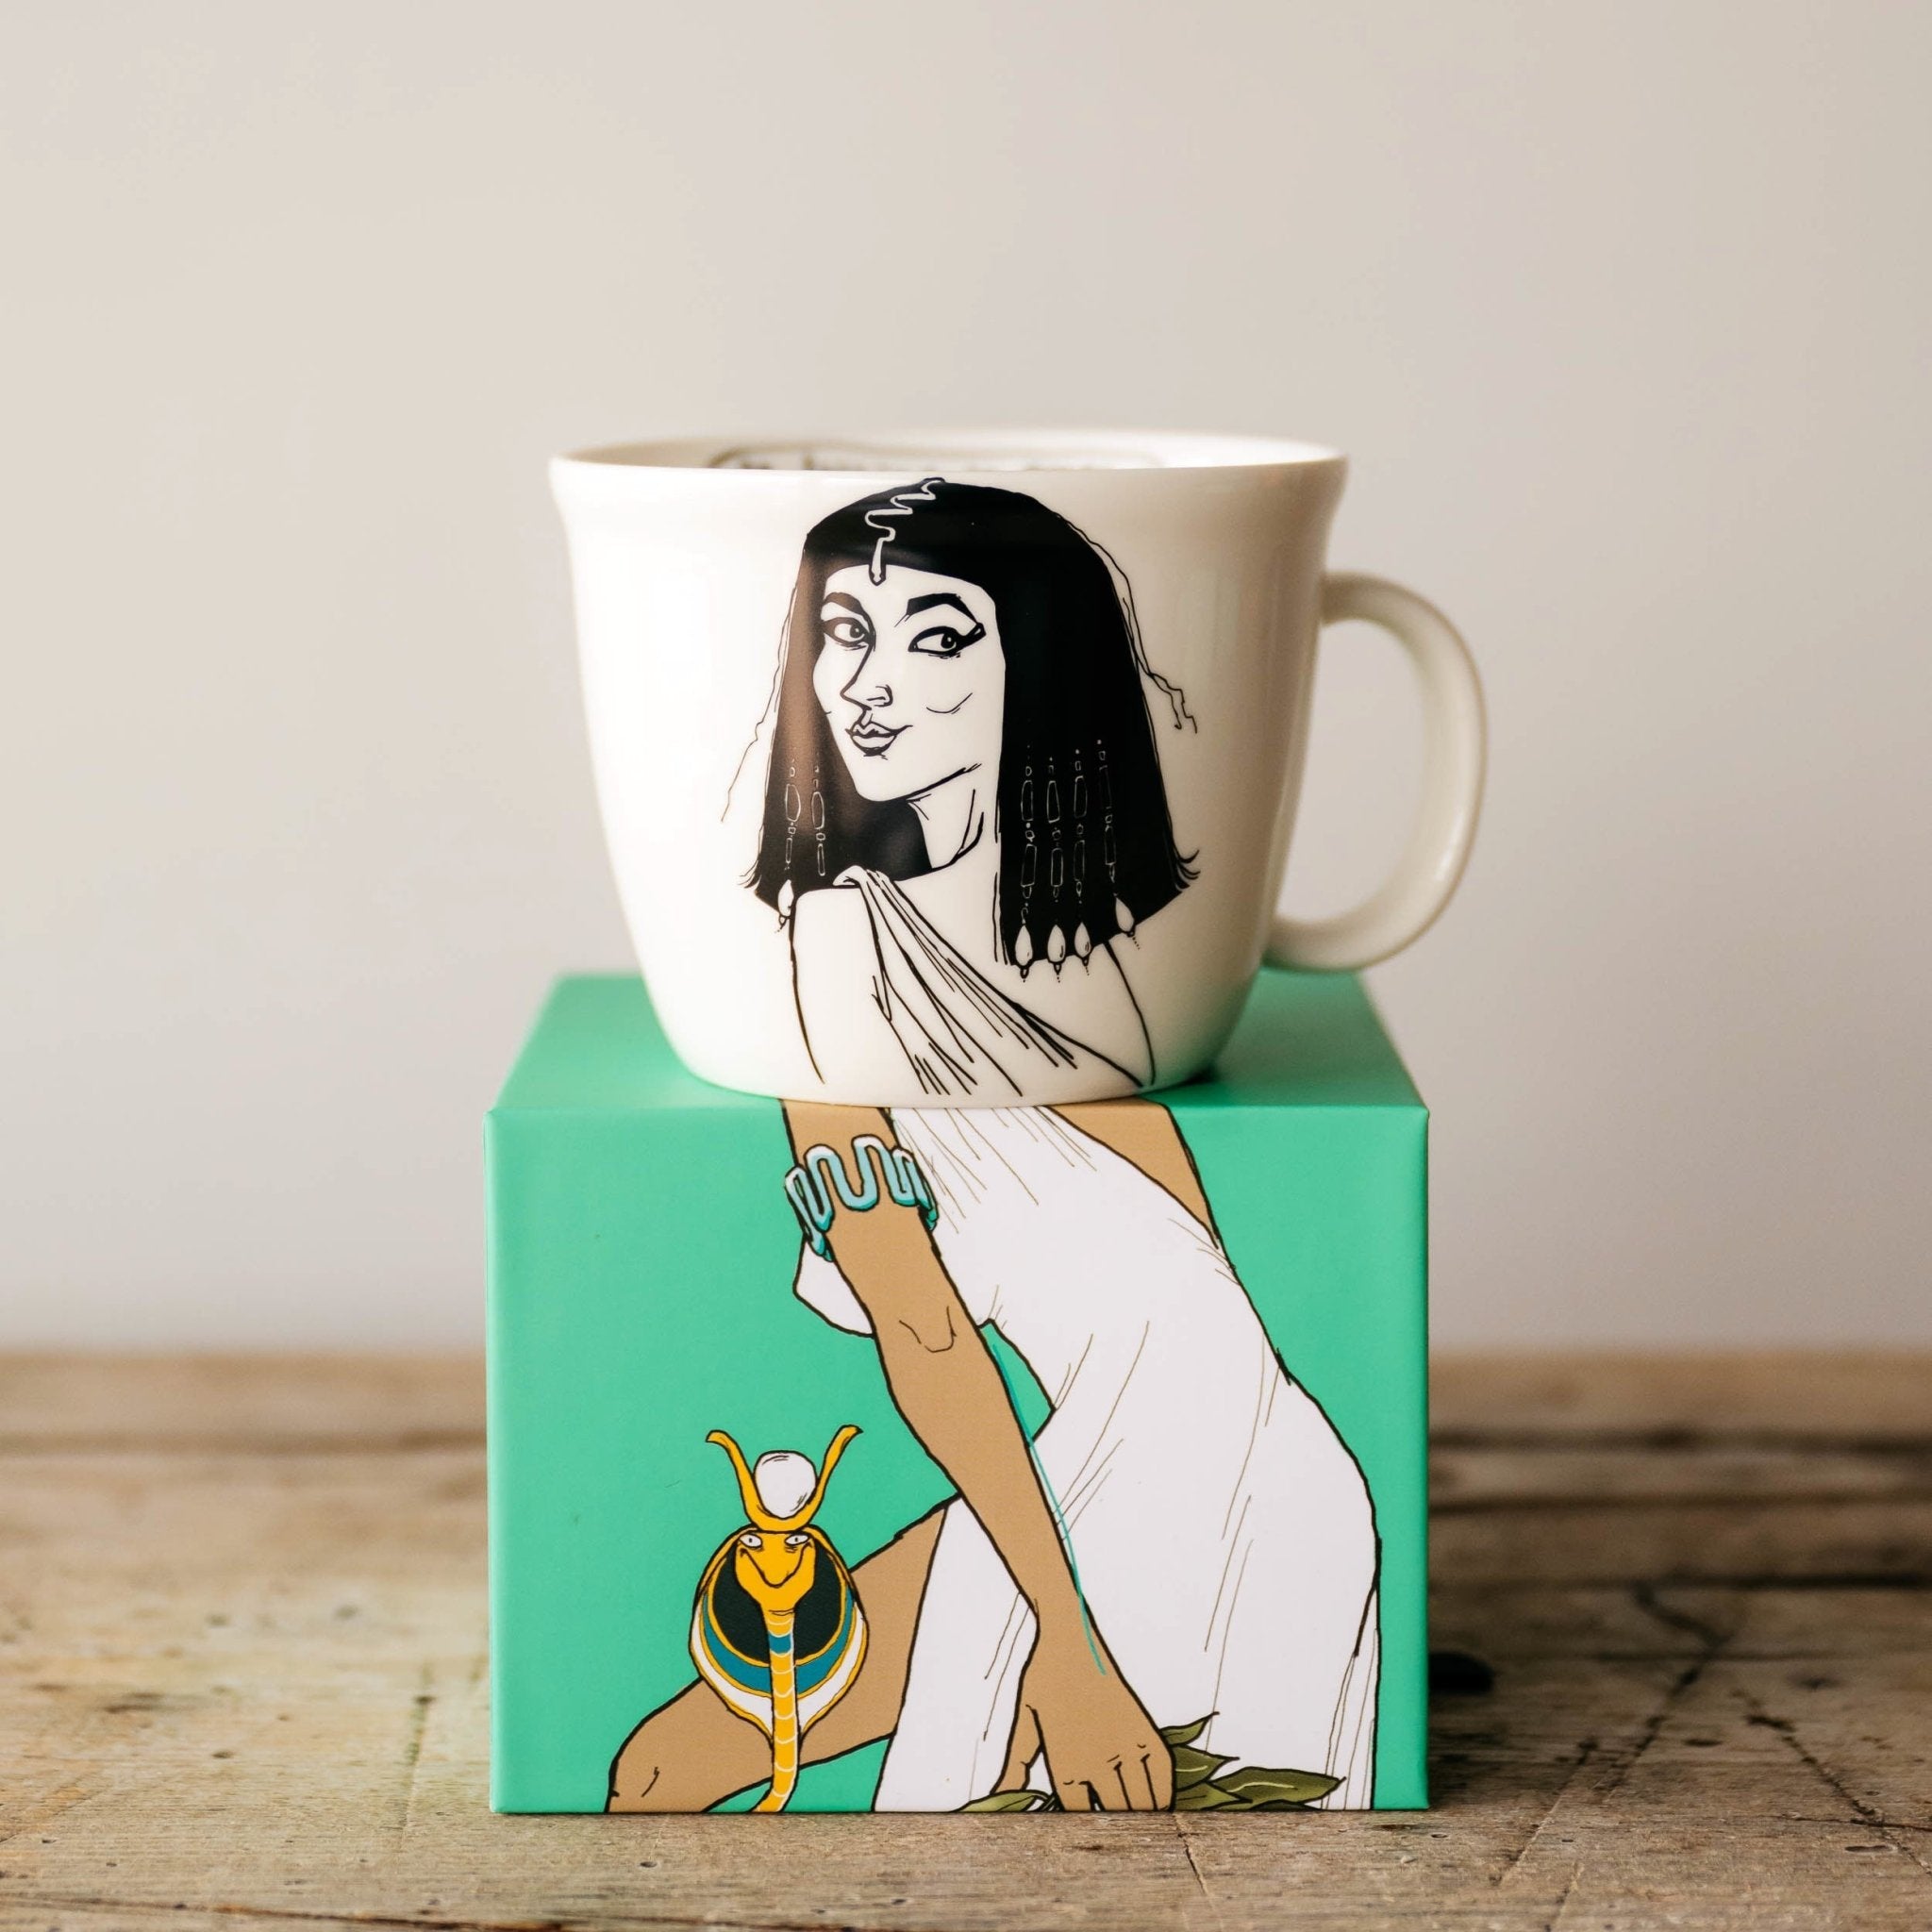 Porcelain cup inspired by Cleopatra on the box